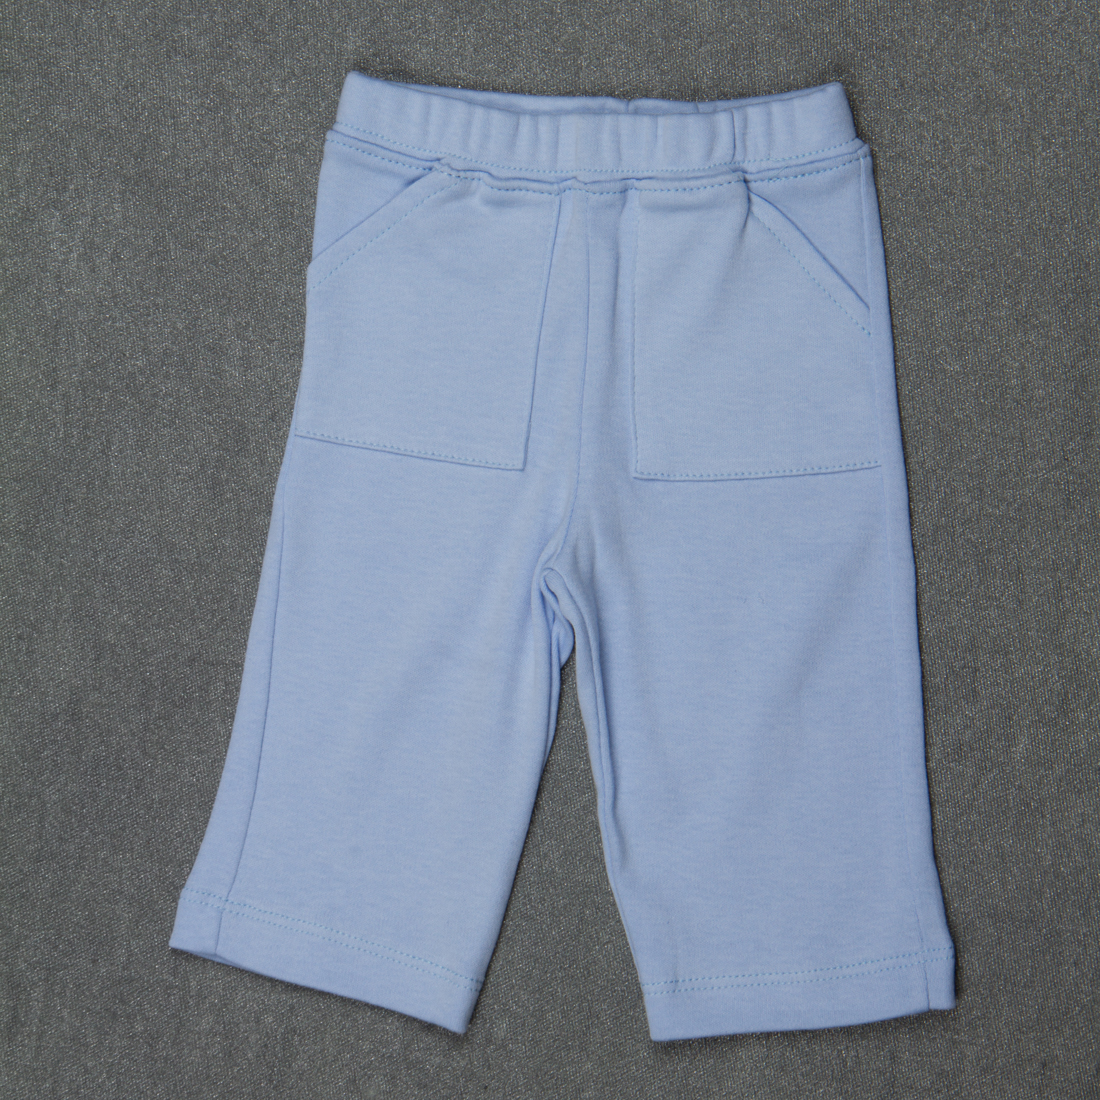 Buy Solid sky blue Pants - Boys Online @ ₹249 from ShopClues